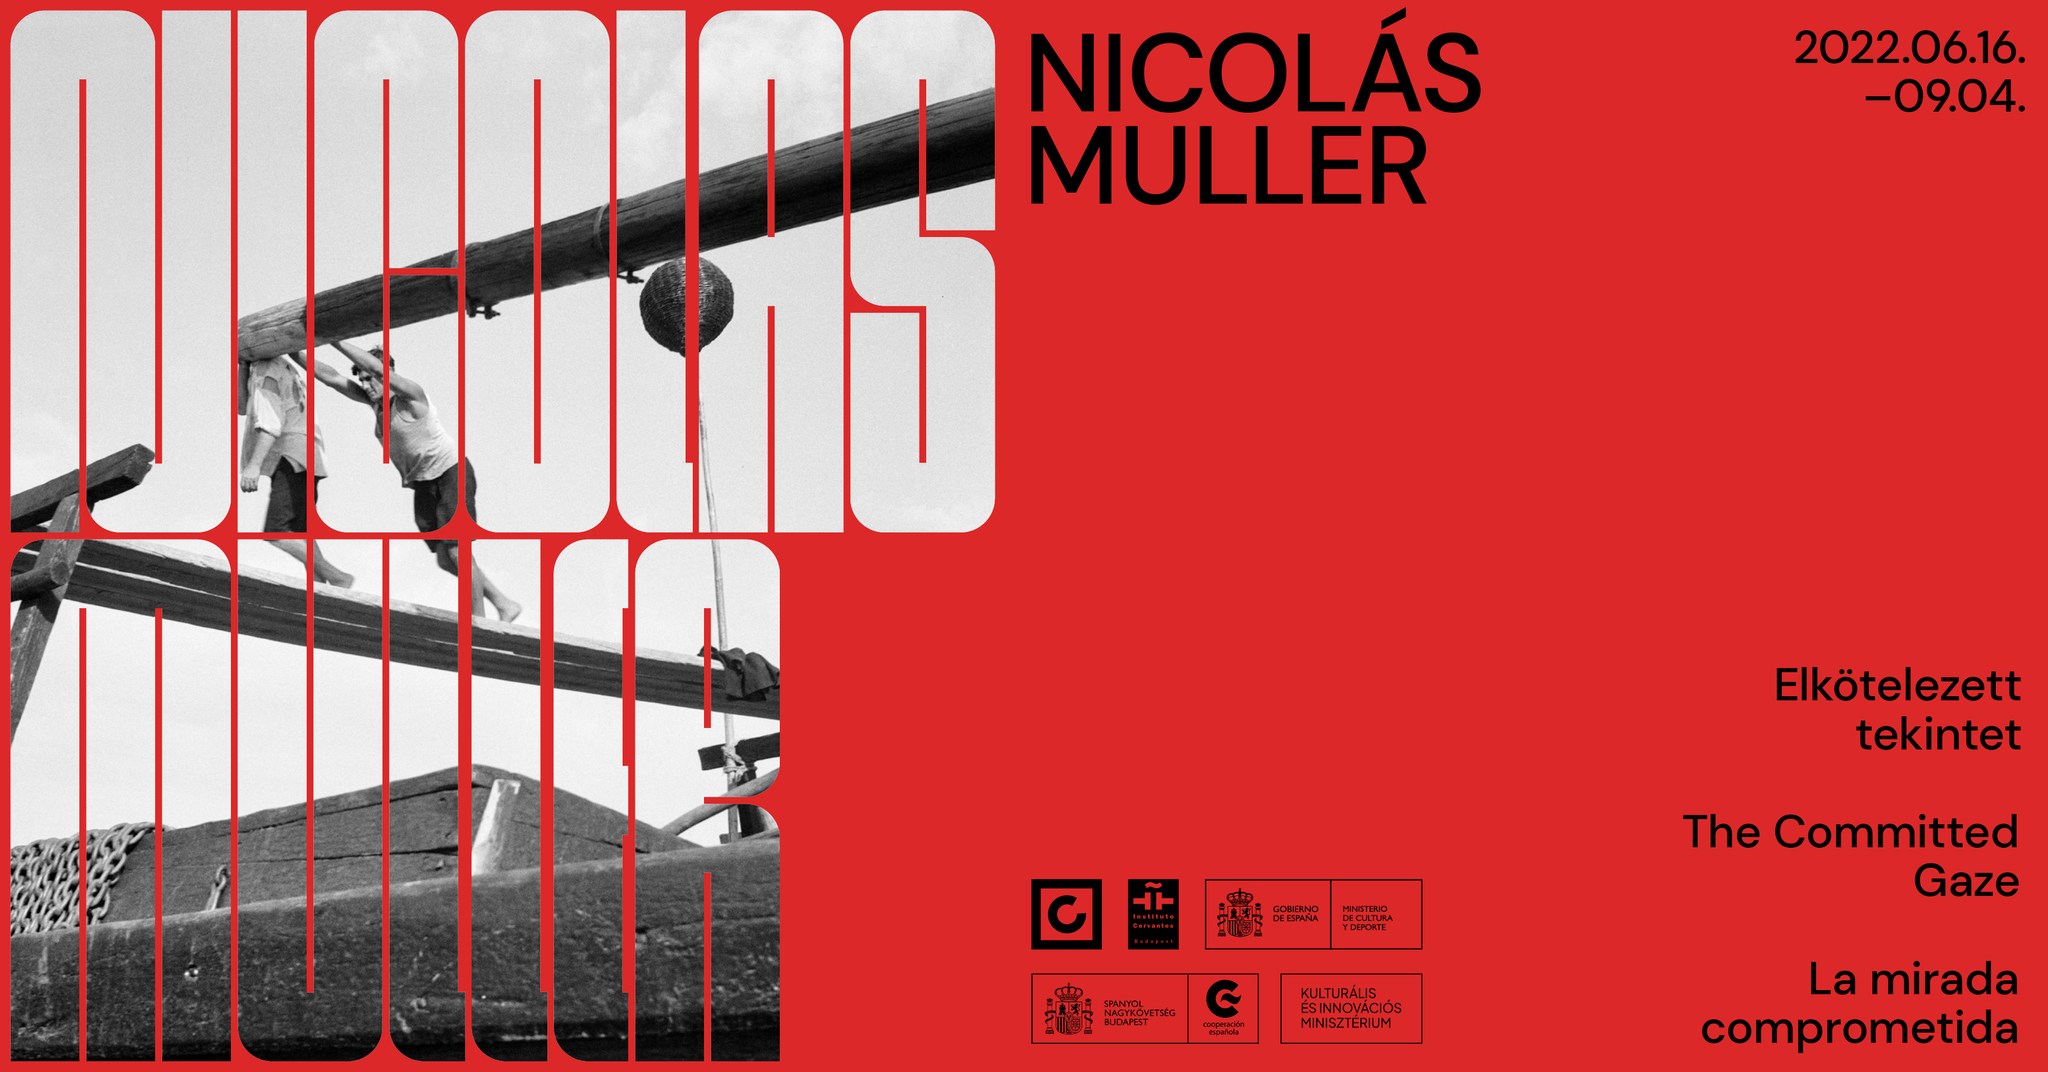 Exhibition of Nicolás Muller’s Photographs Opens at Capa Center